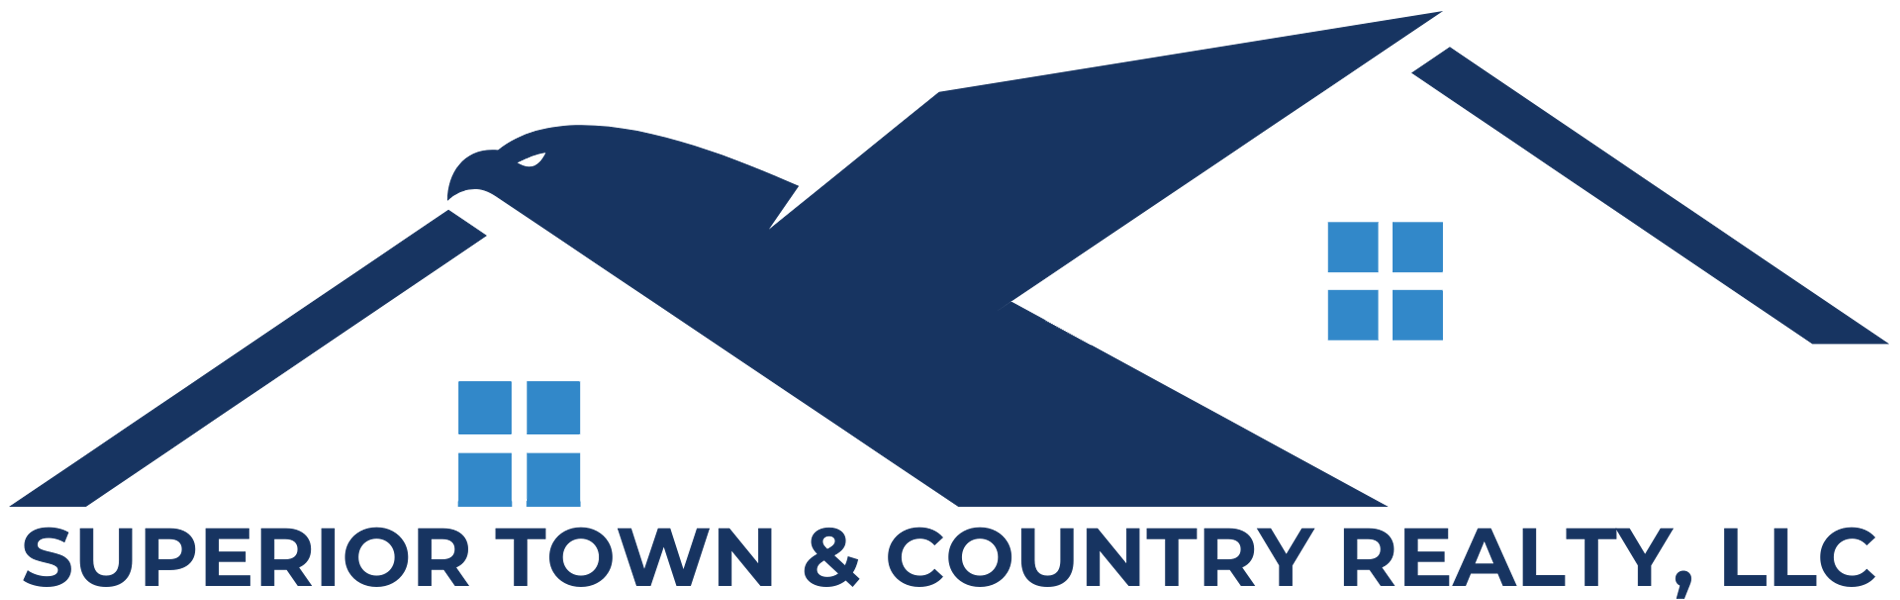 The logo for superior town and country realty llc shows a bird flying over a house.